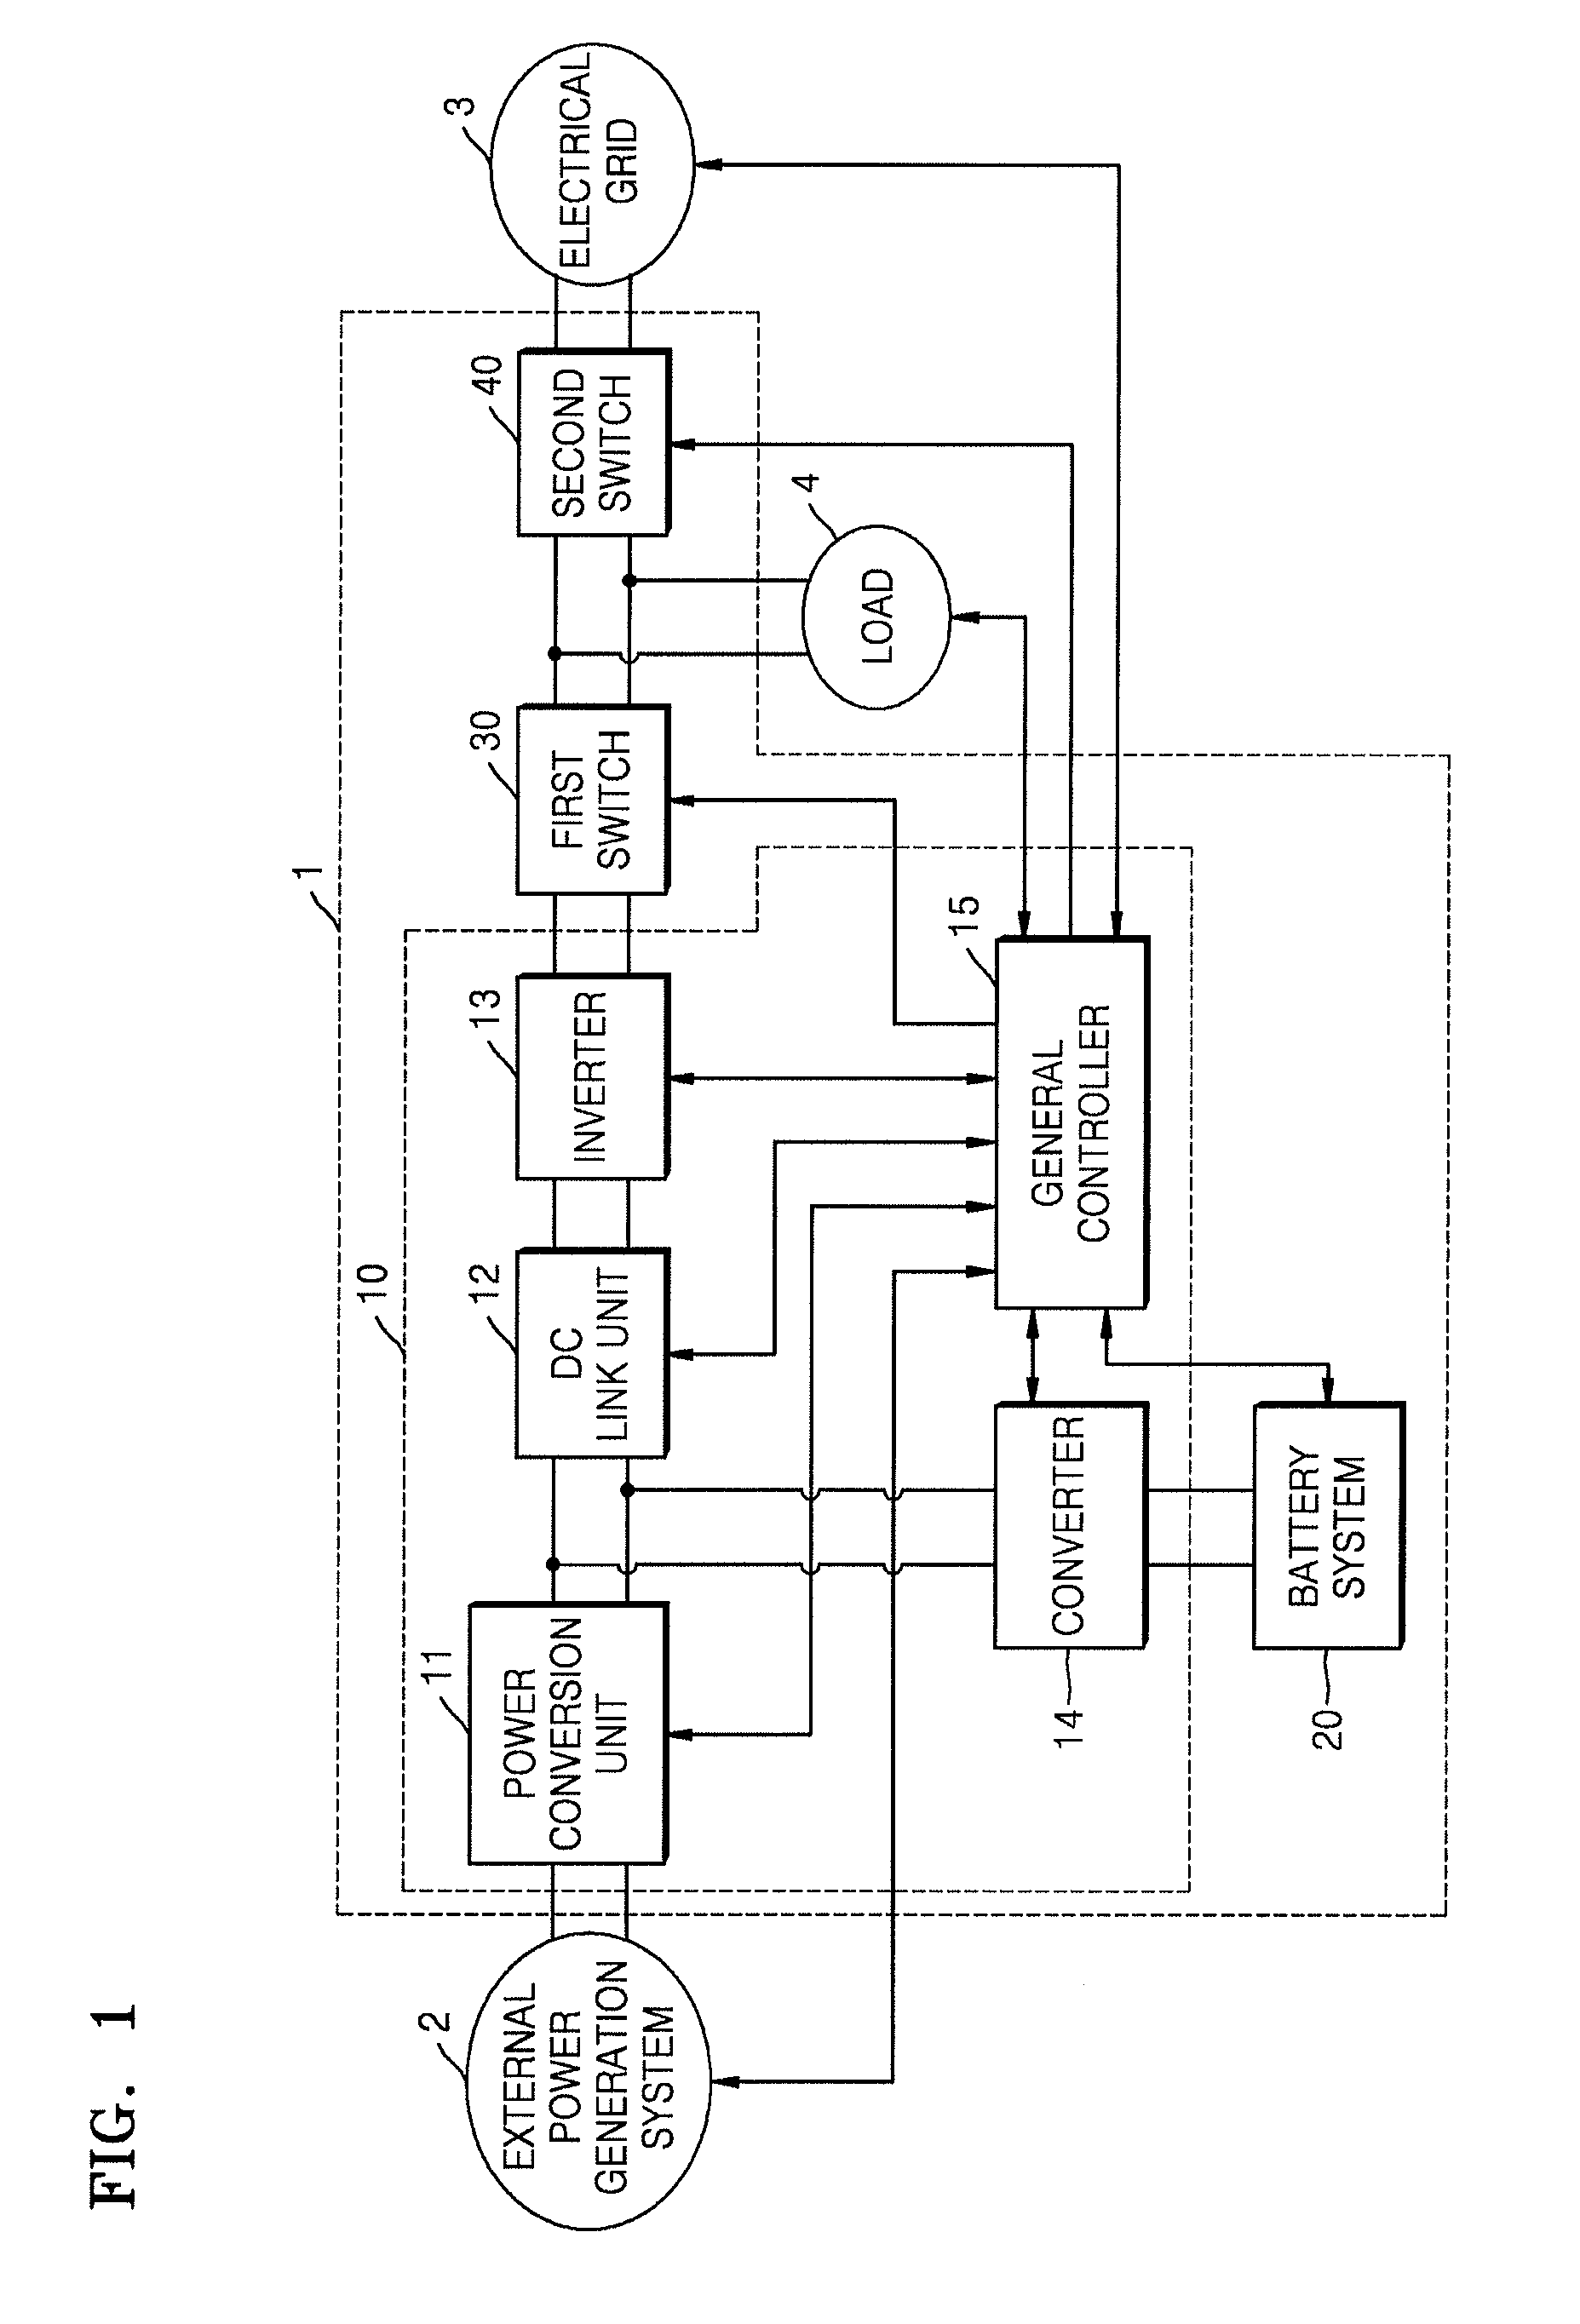 Battery control system and method